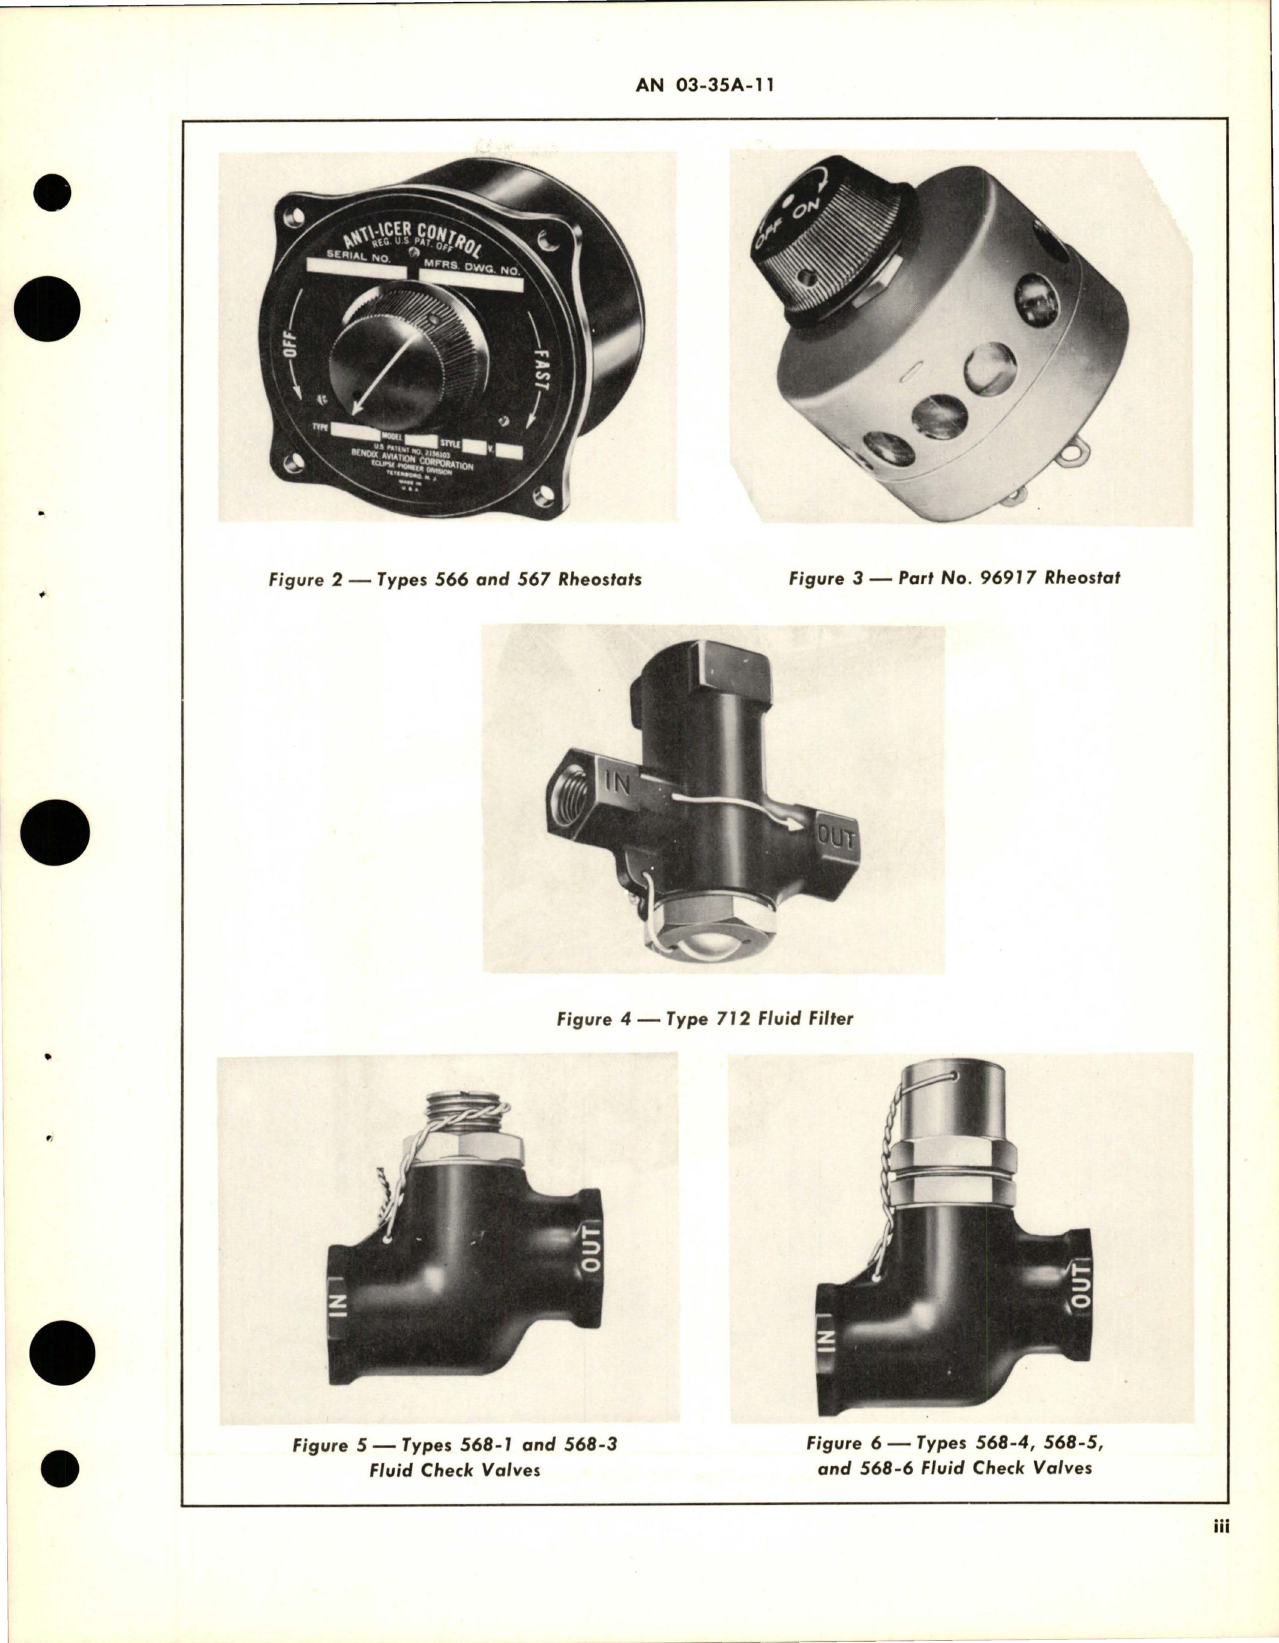 Sample page 5 from AirCorps Library document: Operation, Service and Overhaul Instructions with Parts Catalog for Propeller and Windshield Anti-Icer Pumps and Associated Accessories - Part 744 